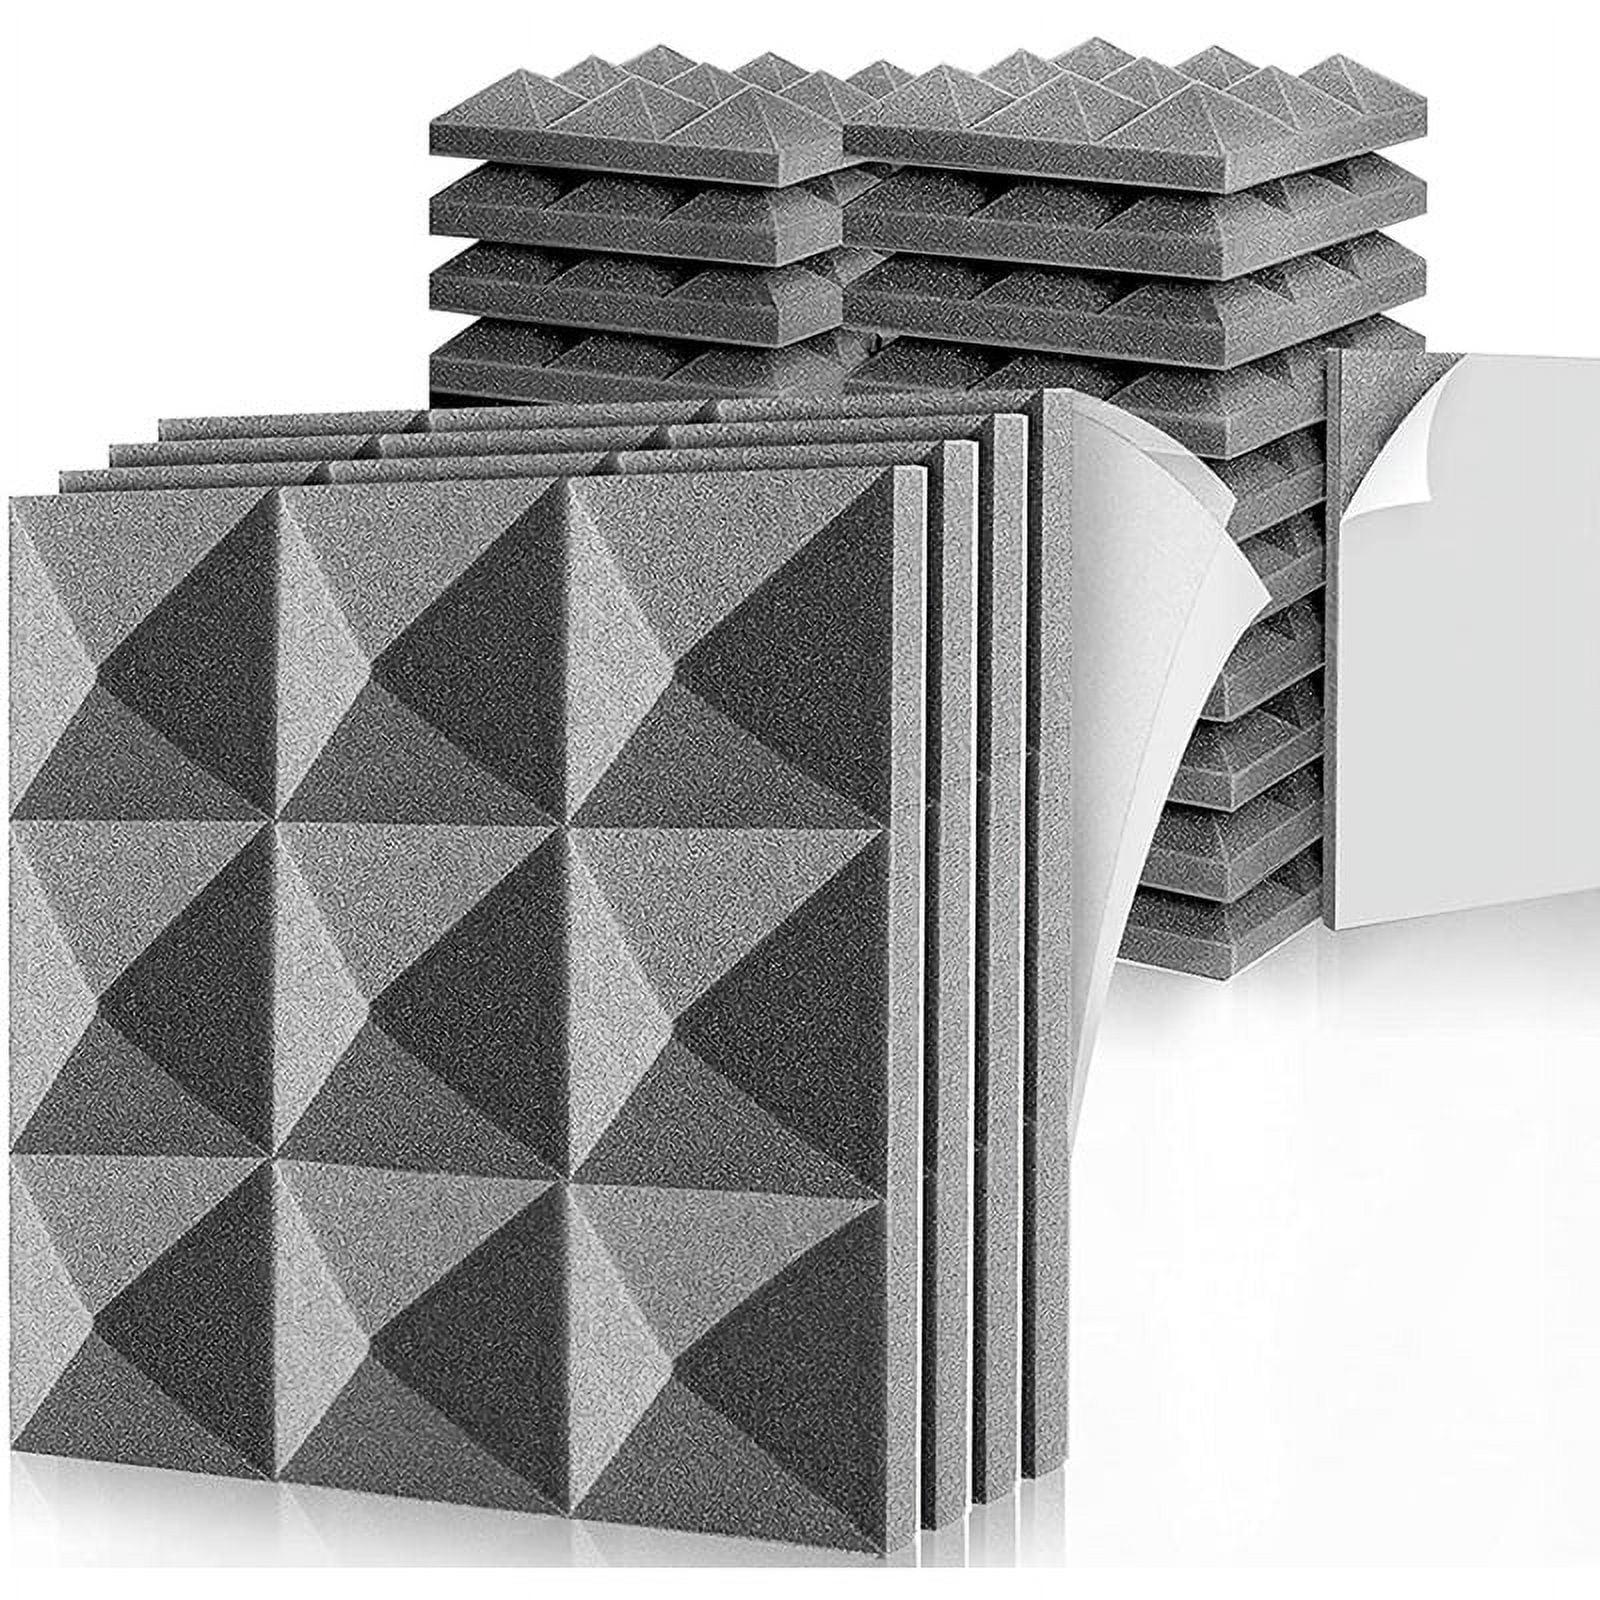 Self-adhesive Sound Proof Foam Panels Sound Proofing Padding for Wall With  High Density, Acoustic Foam Panels for Noise Reduction 